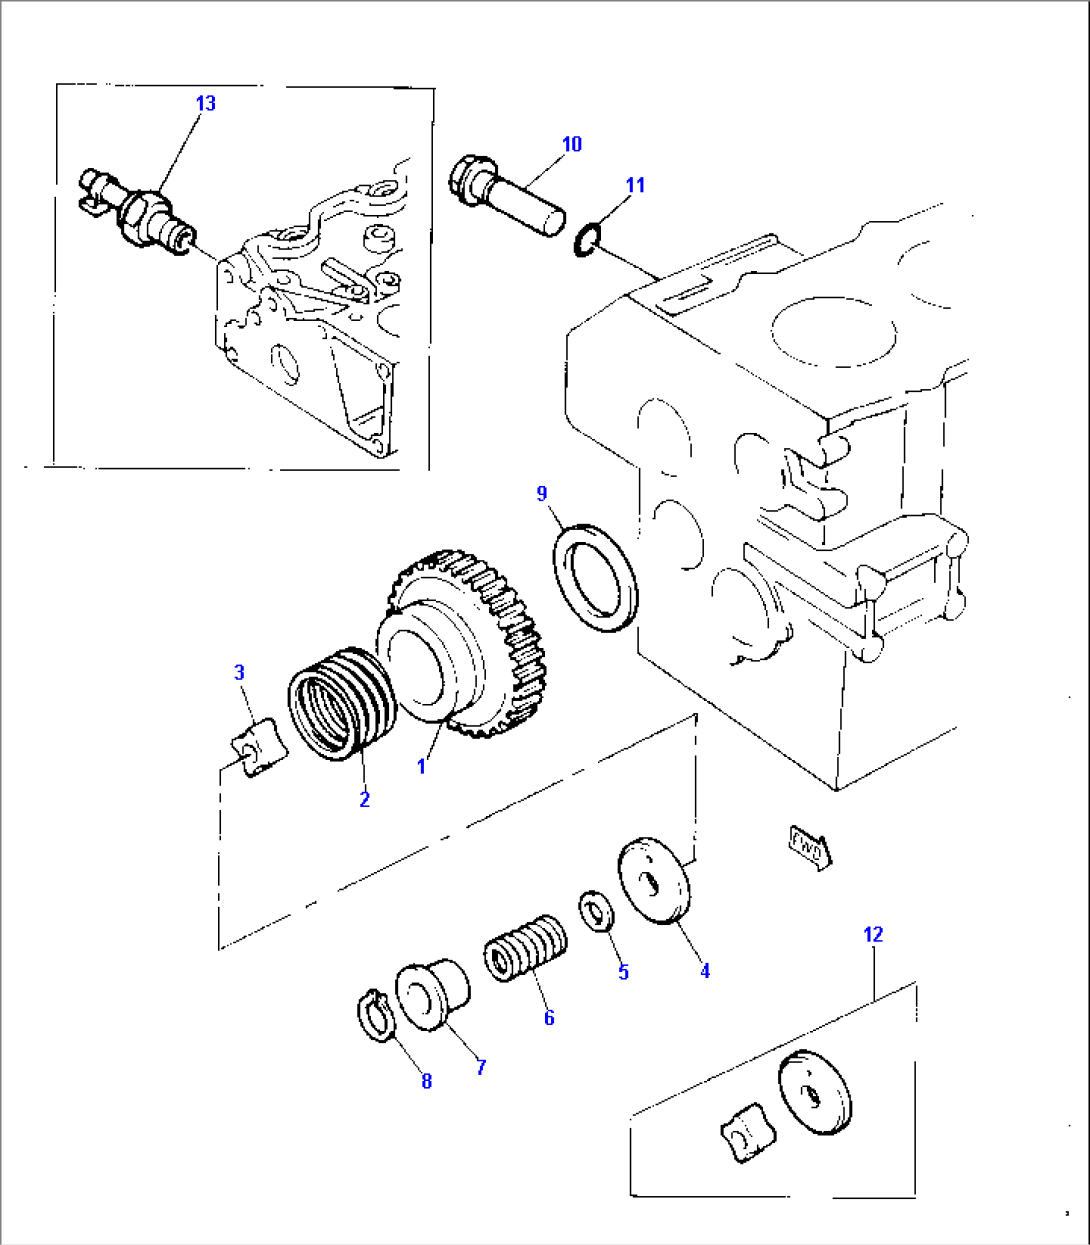 LUBRICATING OIL PUMP AND DELIVERY HOUSING